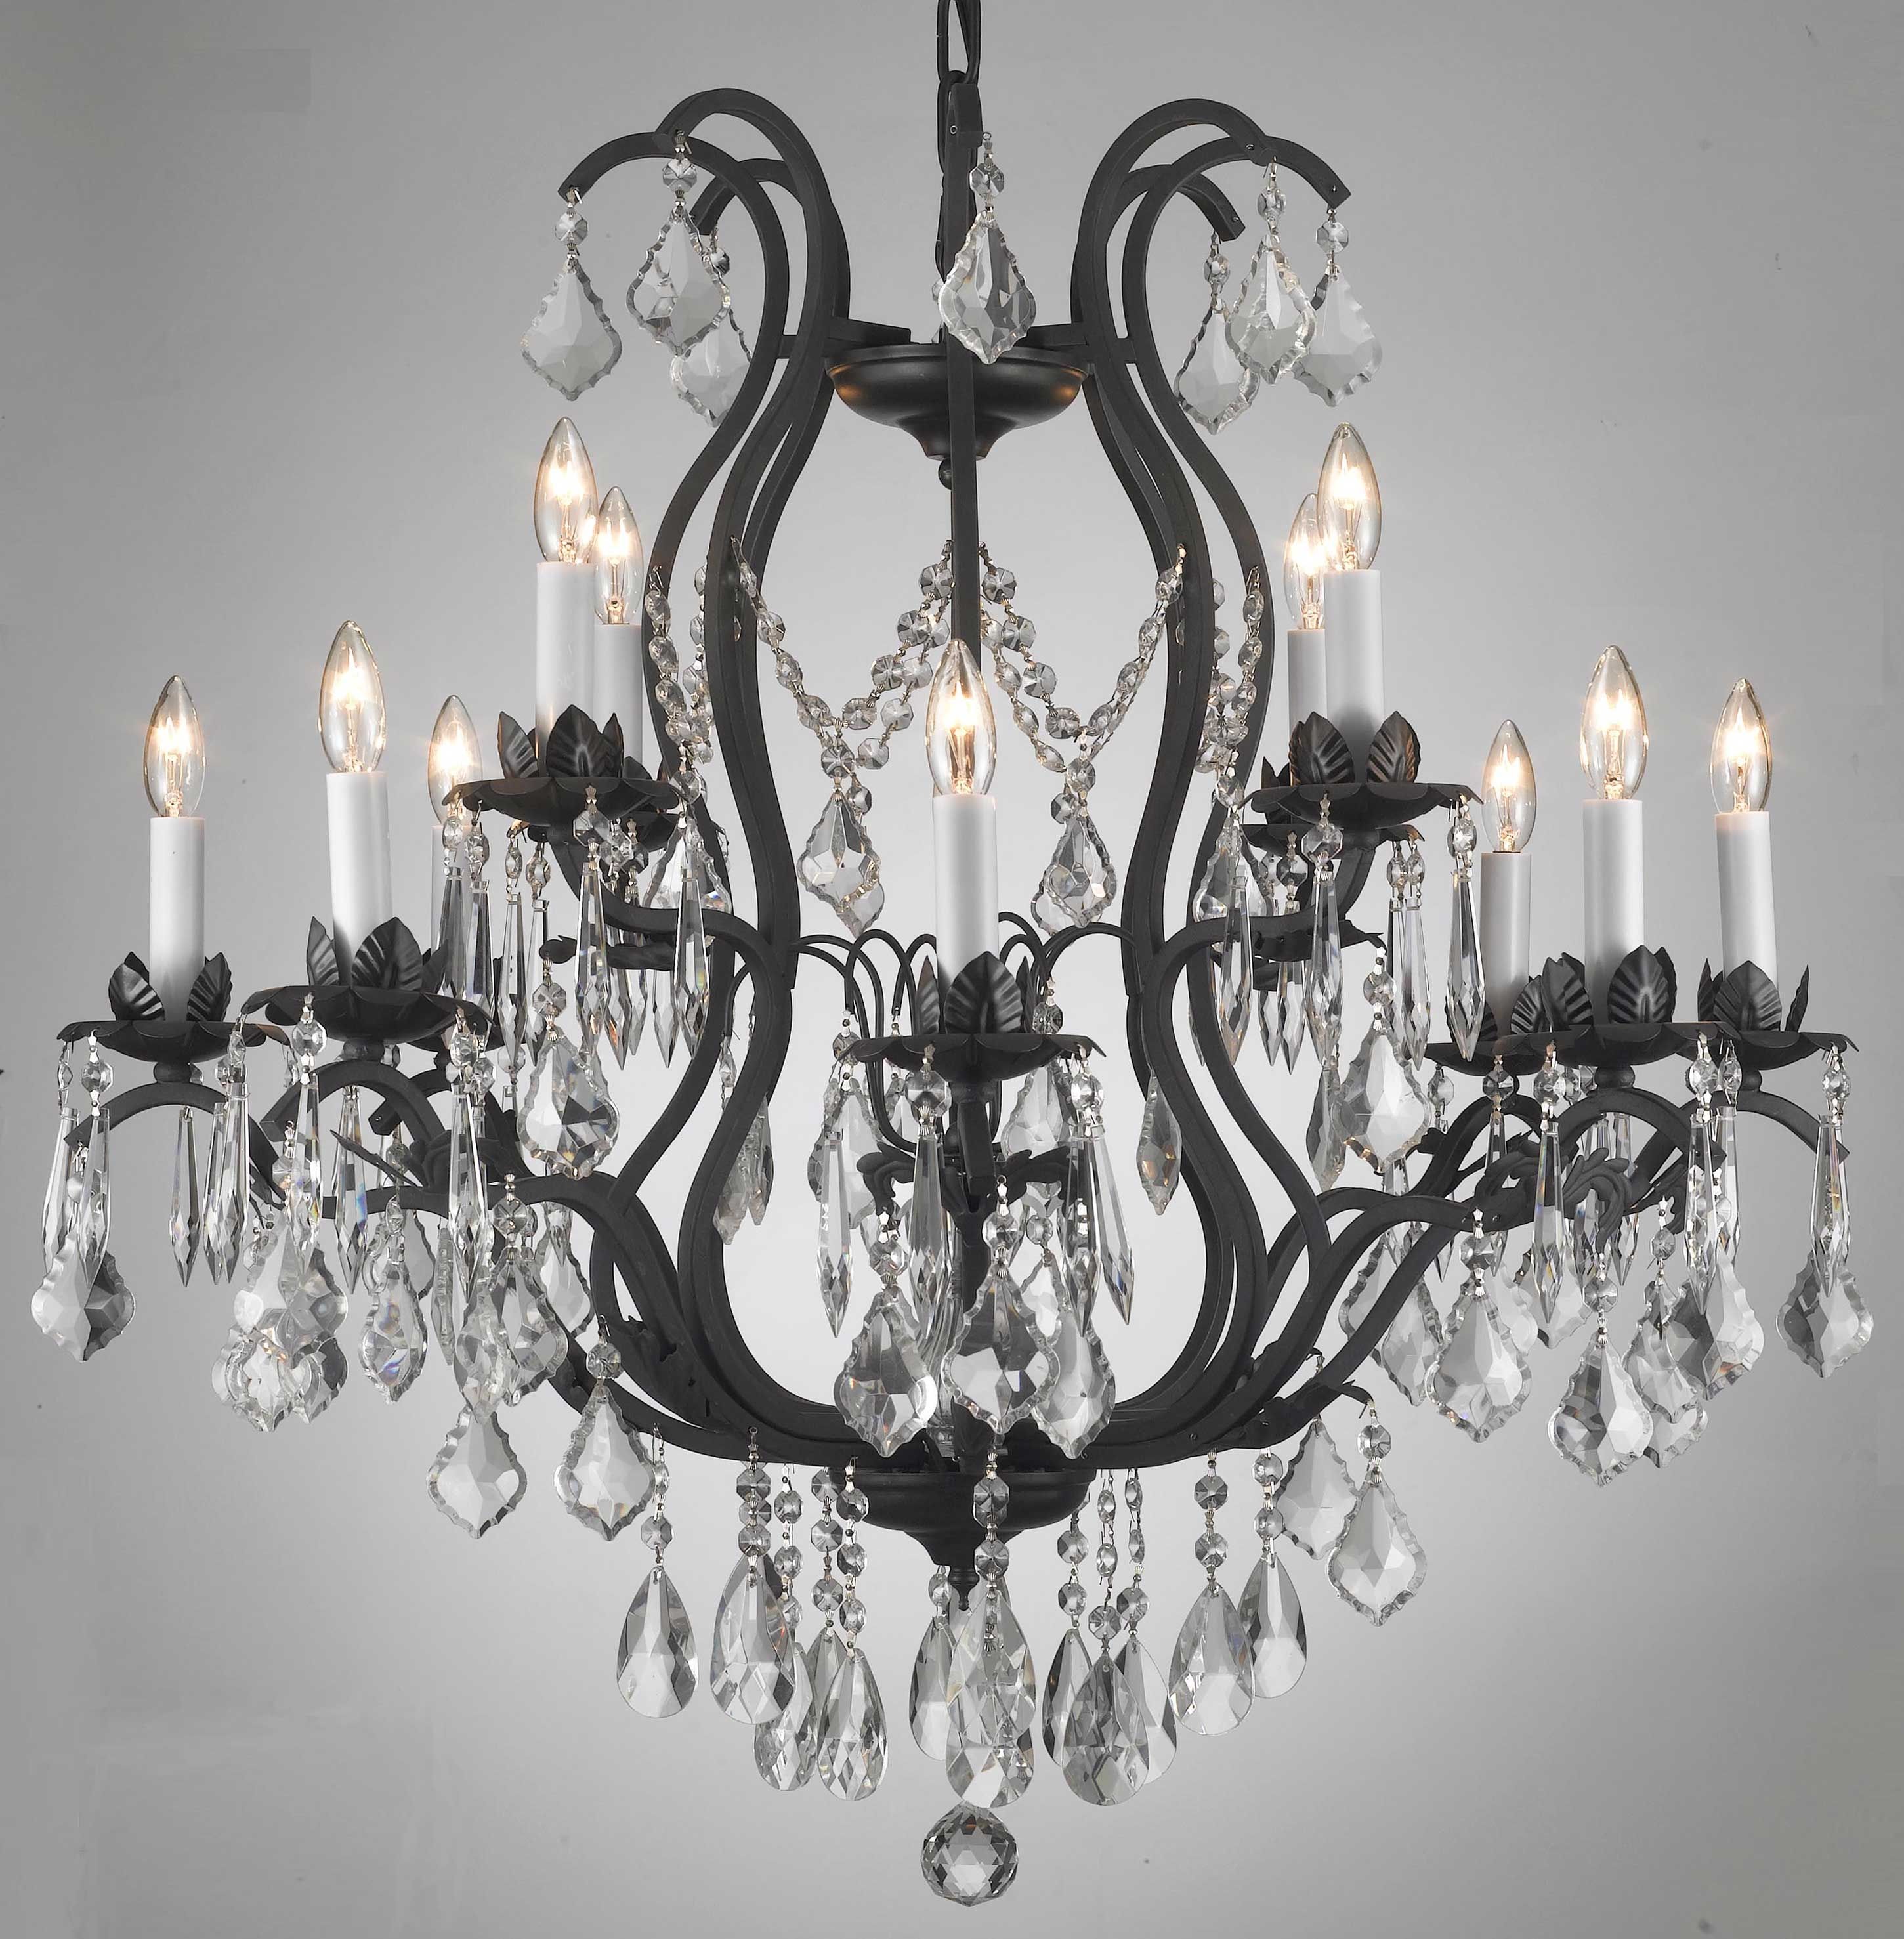 G93 Cs18643 Gallery Flush French Empire Crystal Flush Basket Throughout Grey Crystal Chandelier (Photo 7 of 12)